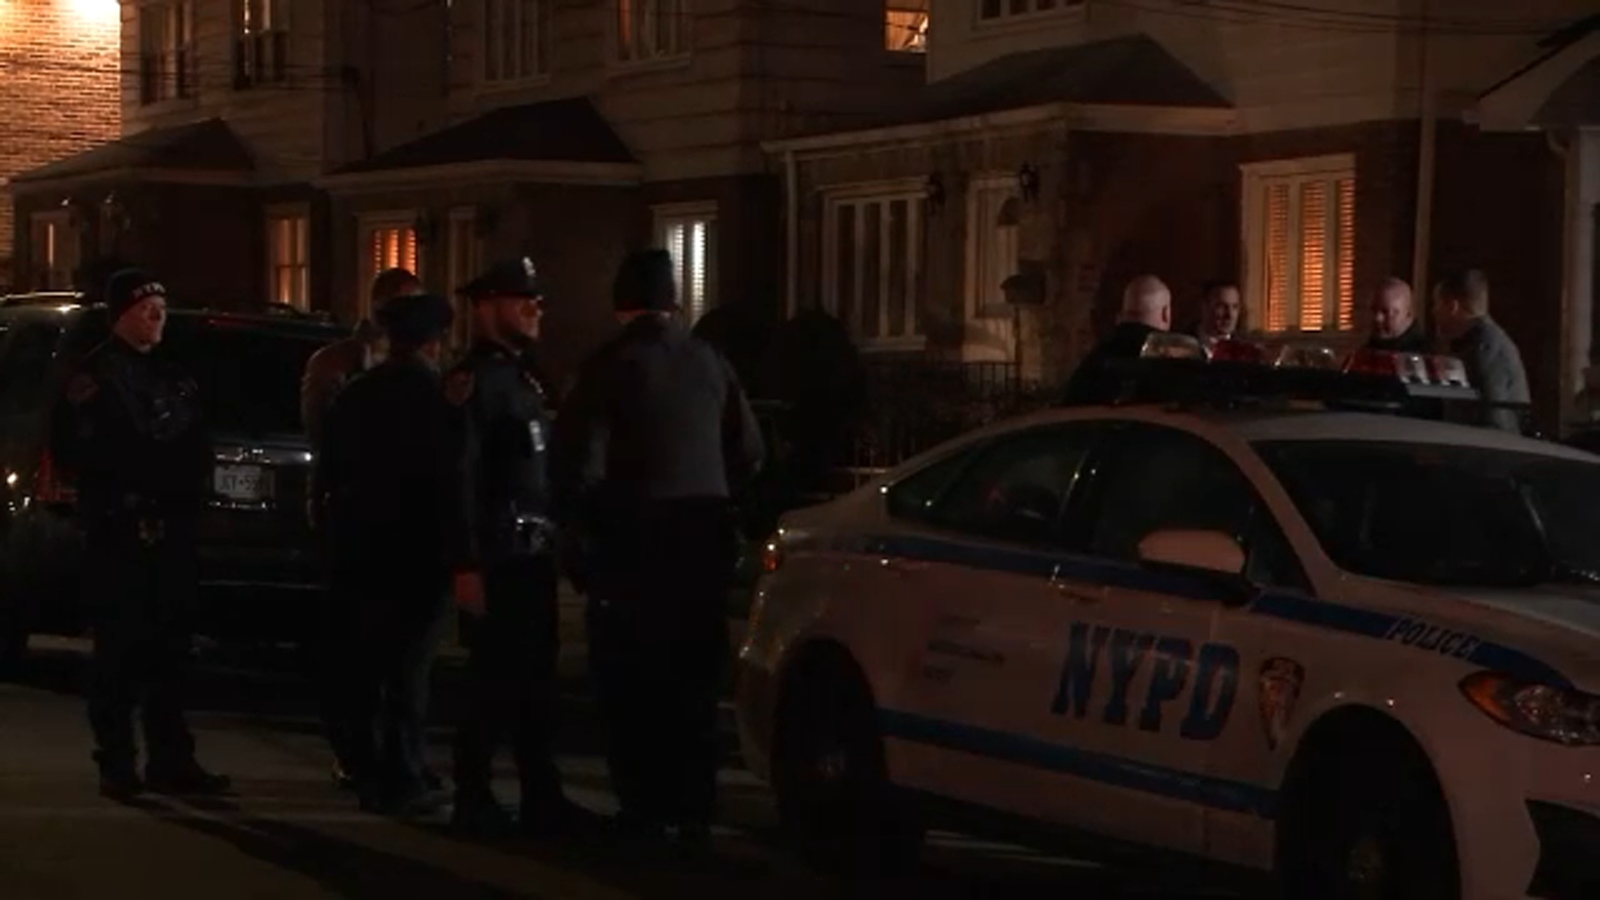 Man found dead in front yard of Queens home